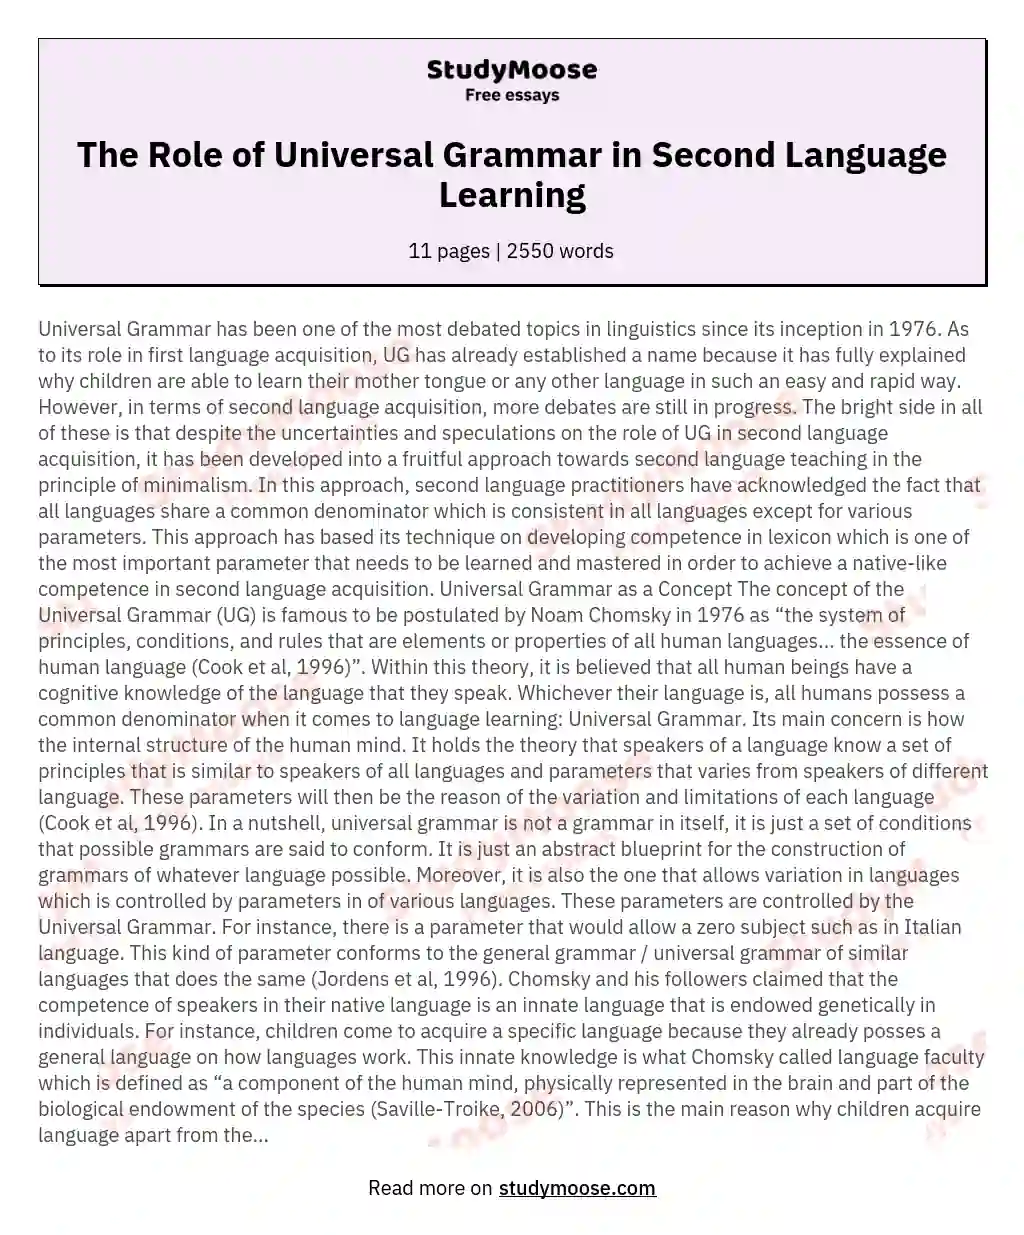 The Role of Universal Grammar in Second Language Learning essay